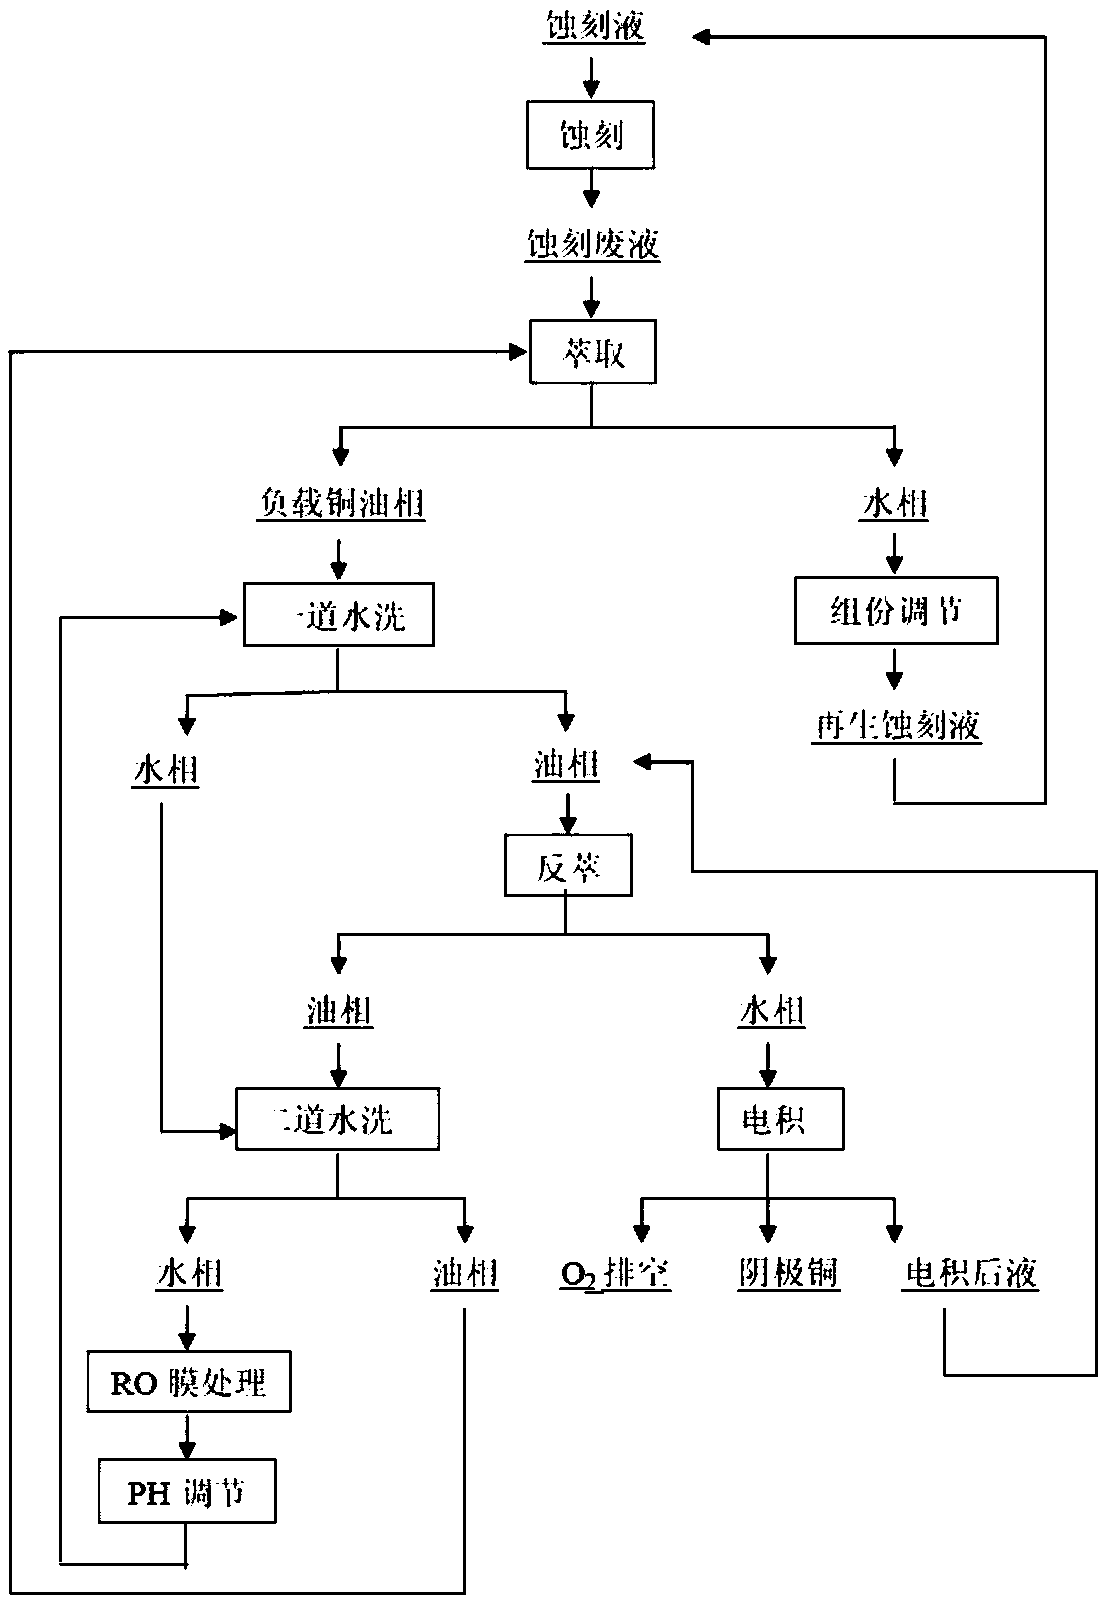 Alkaline etching solution recycling regeneration system and method thereof